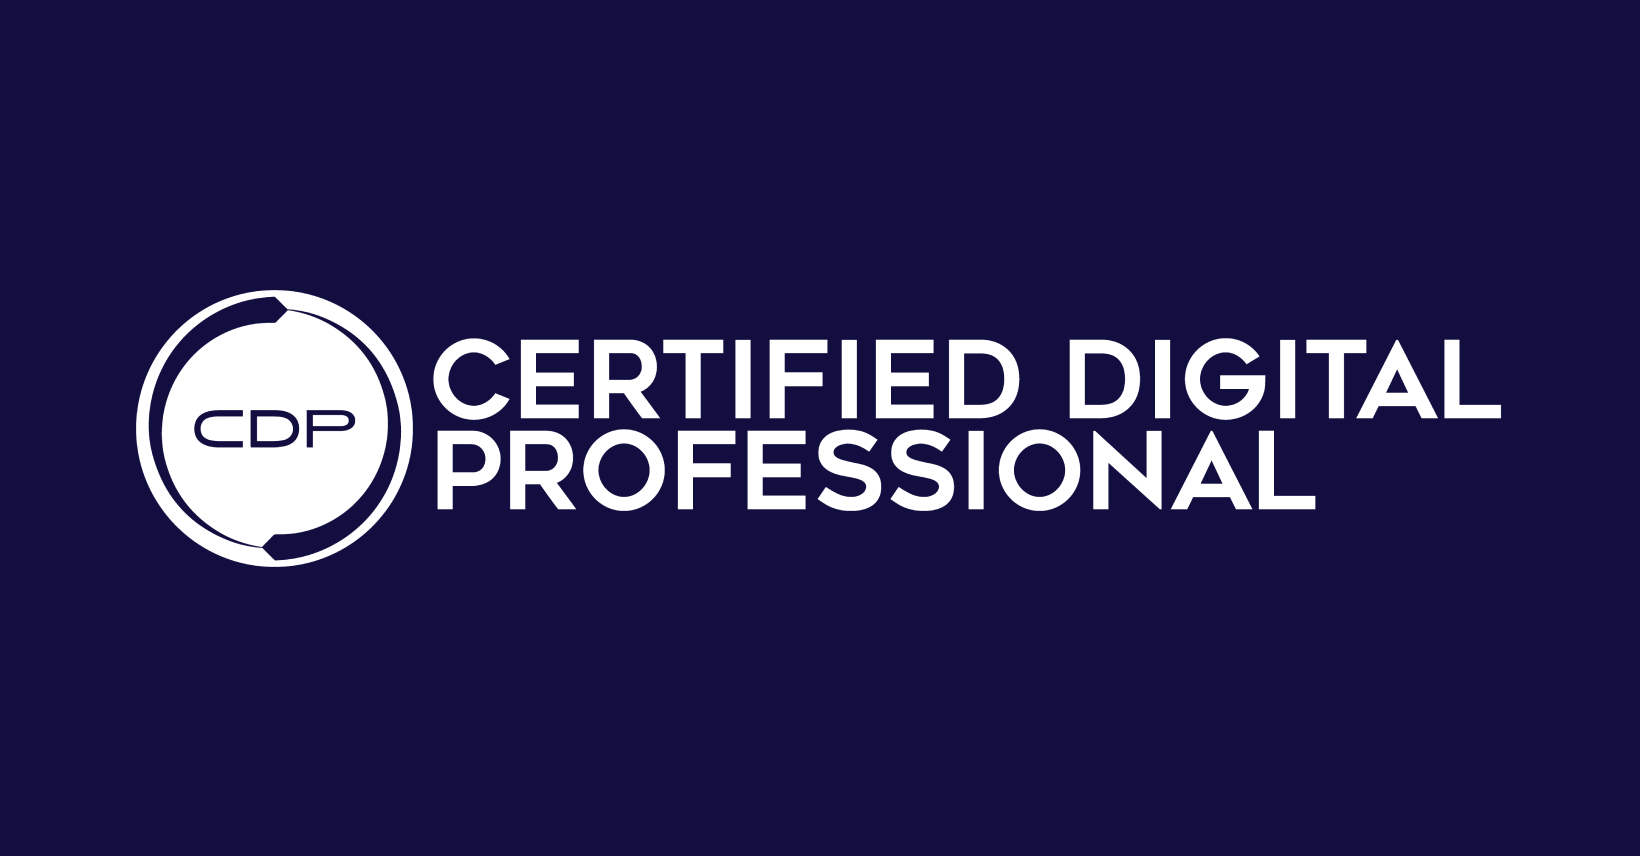 Certified Digital Professional (CDP) and MMA partner to bring modern marketing education for APAC talents